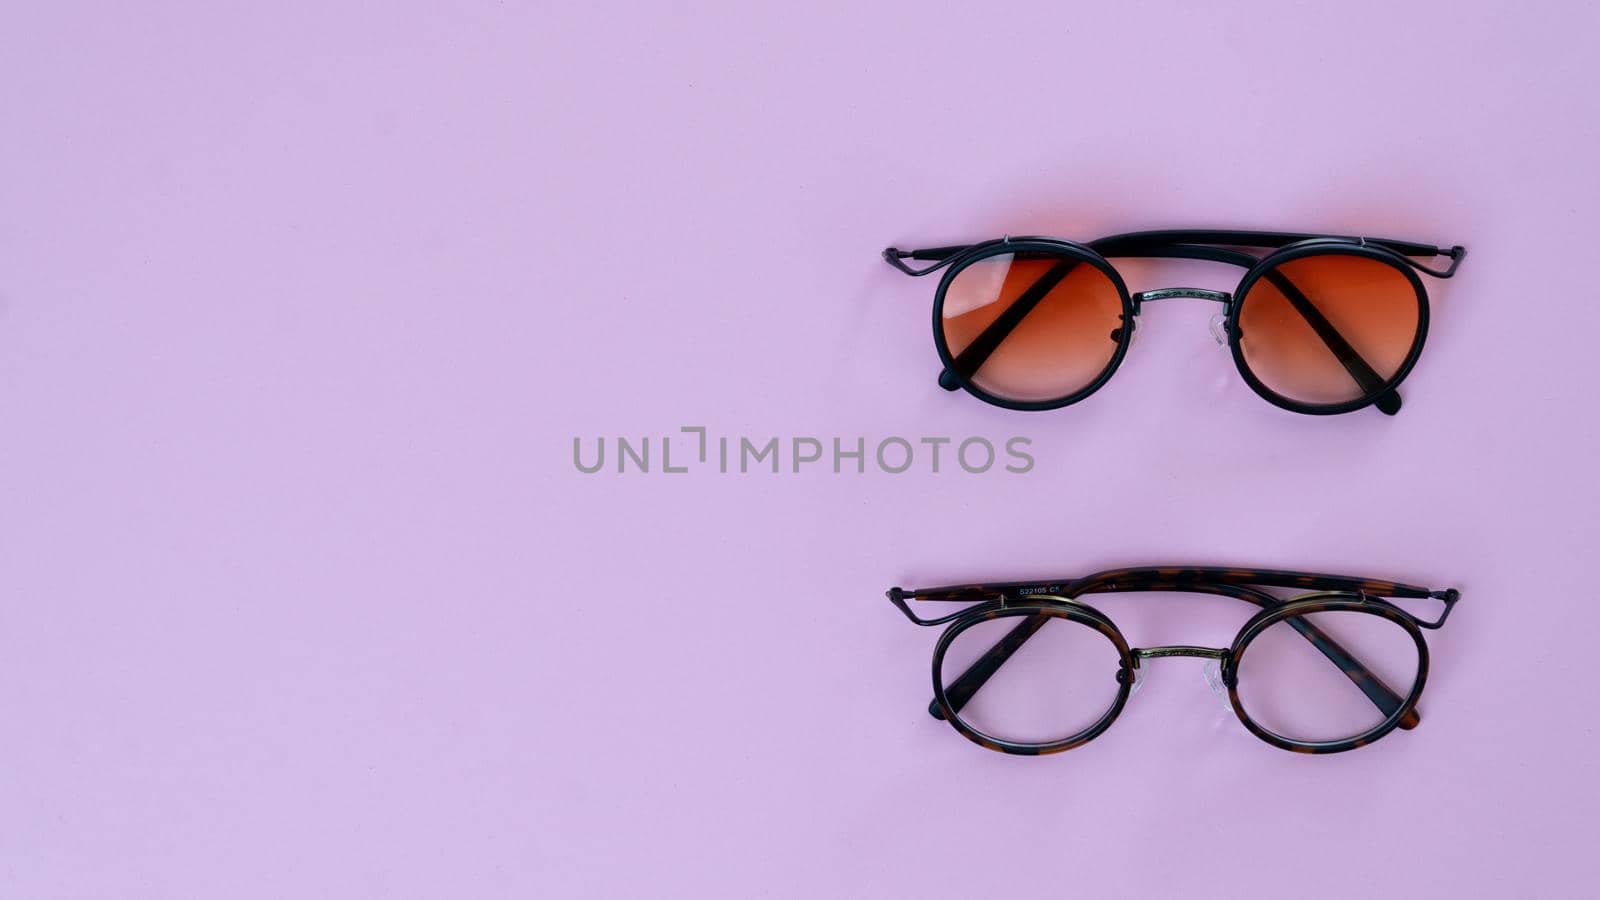 Eyeglasses and sunglasses on a purple background with space for text by voktybre